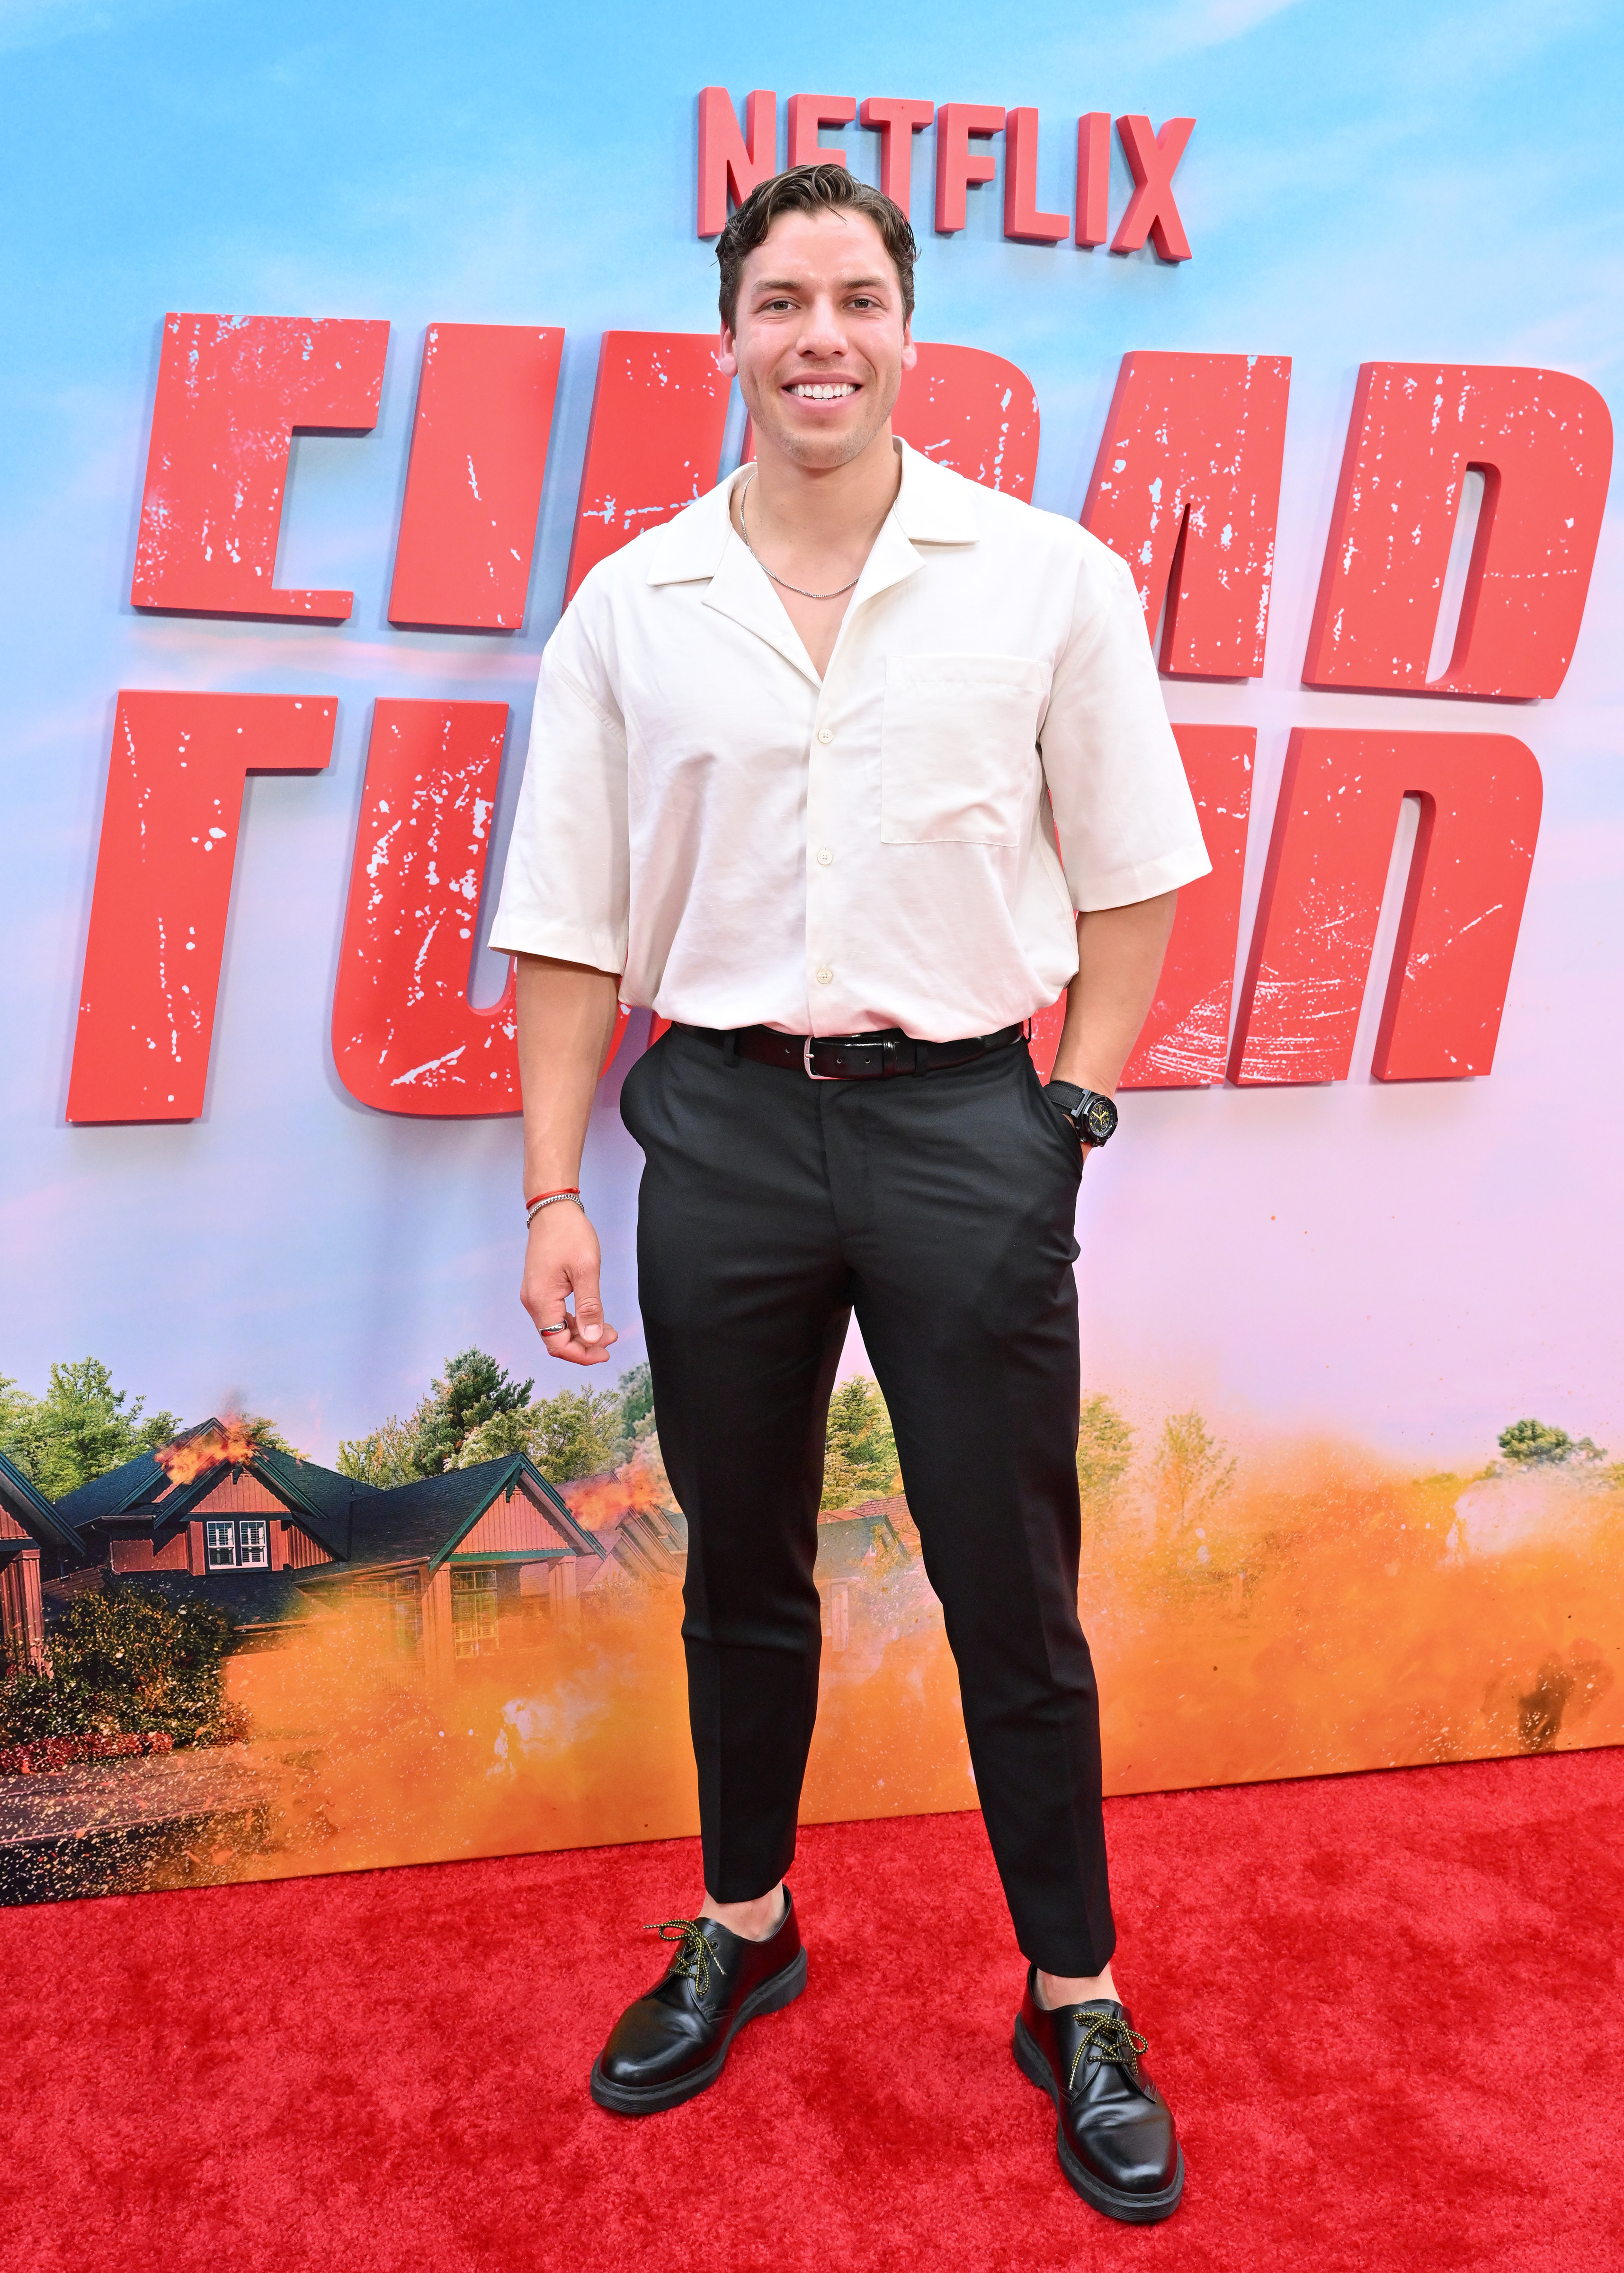 Joseph Baena at the Los Angeles premiere of "FUBAR" on May 22, 2023, in California | Source: Getty Images